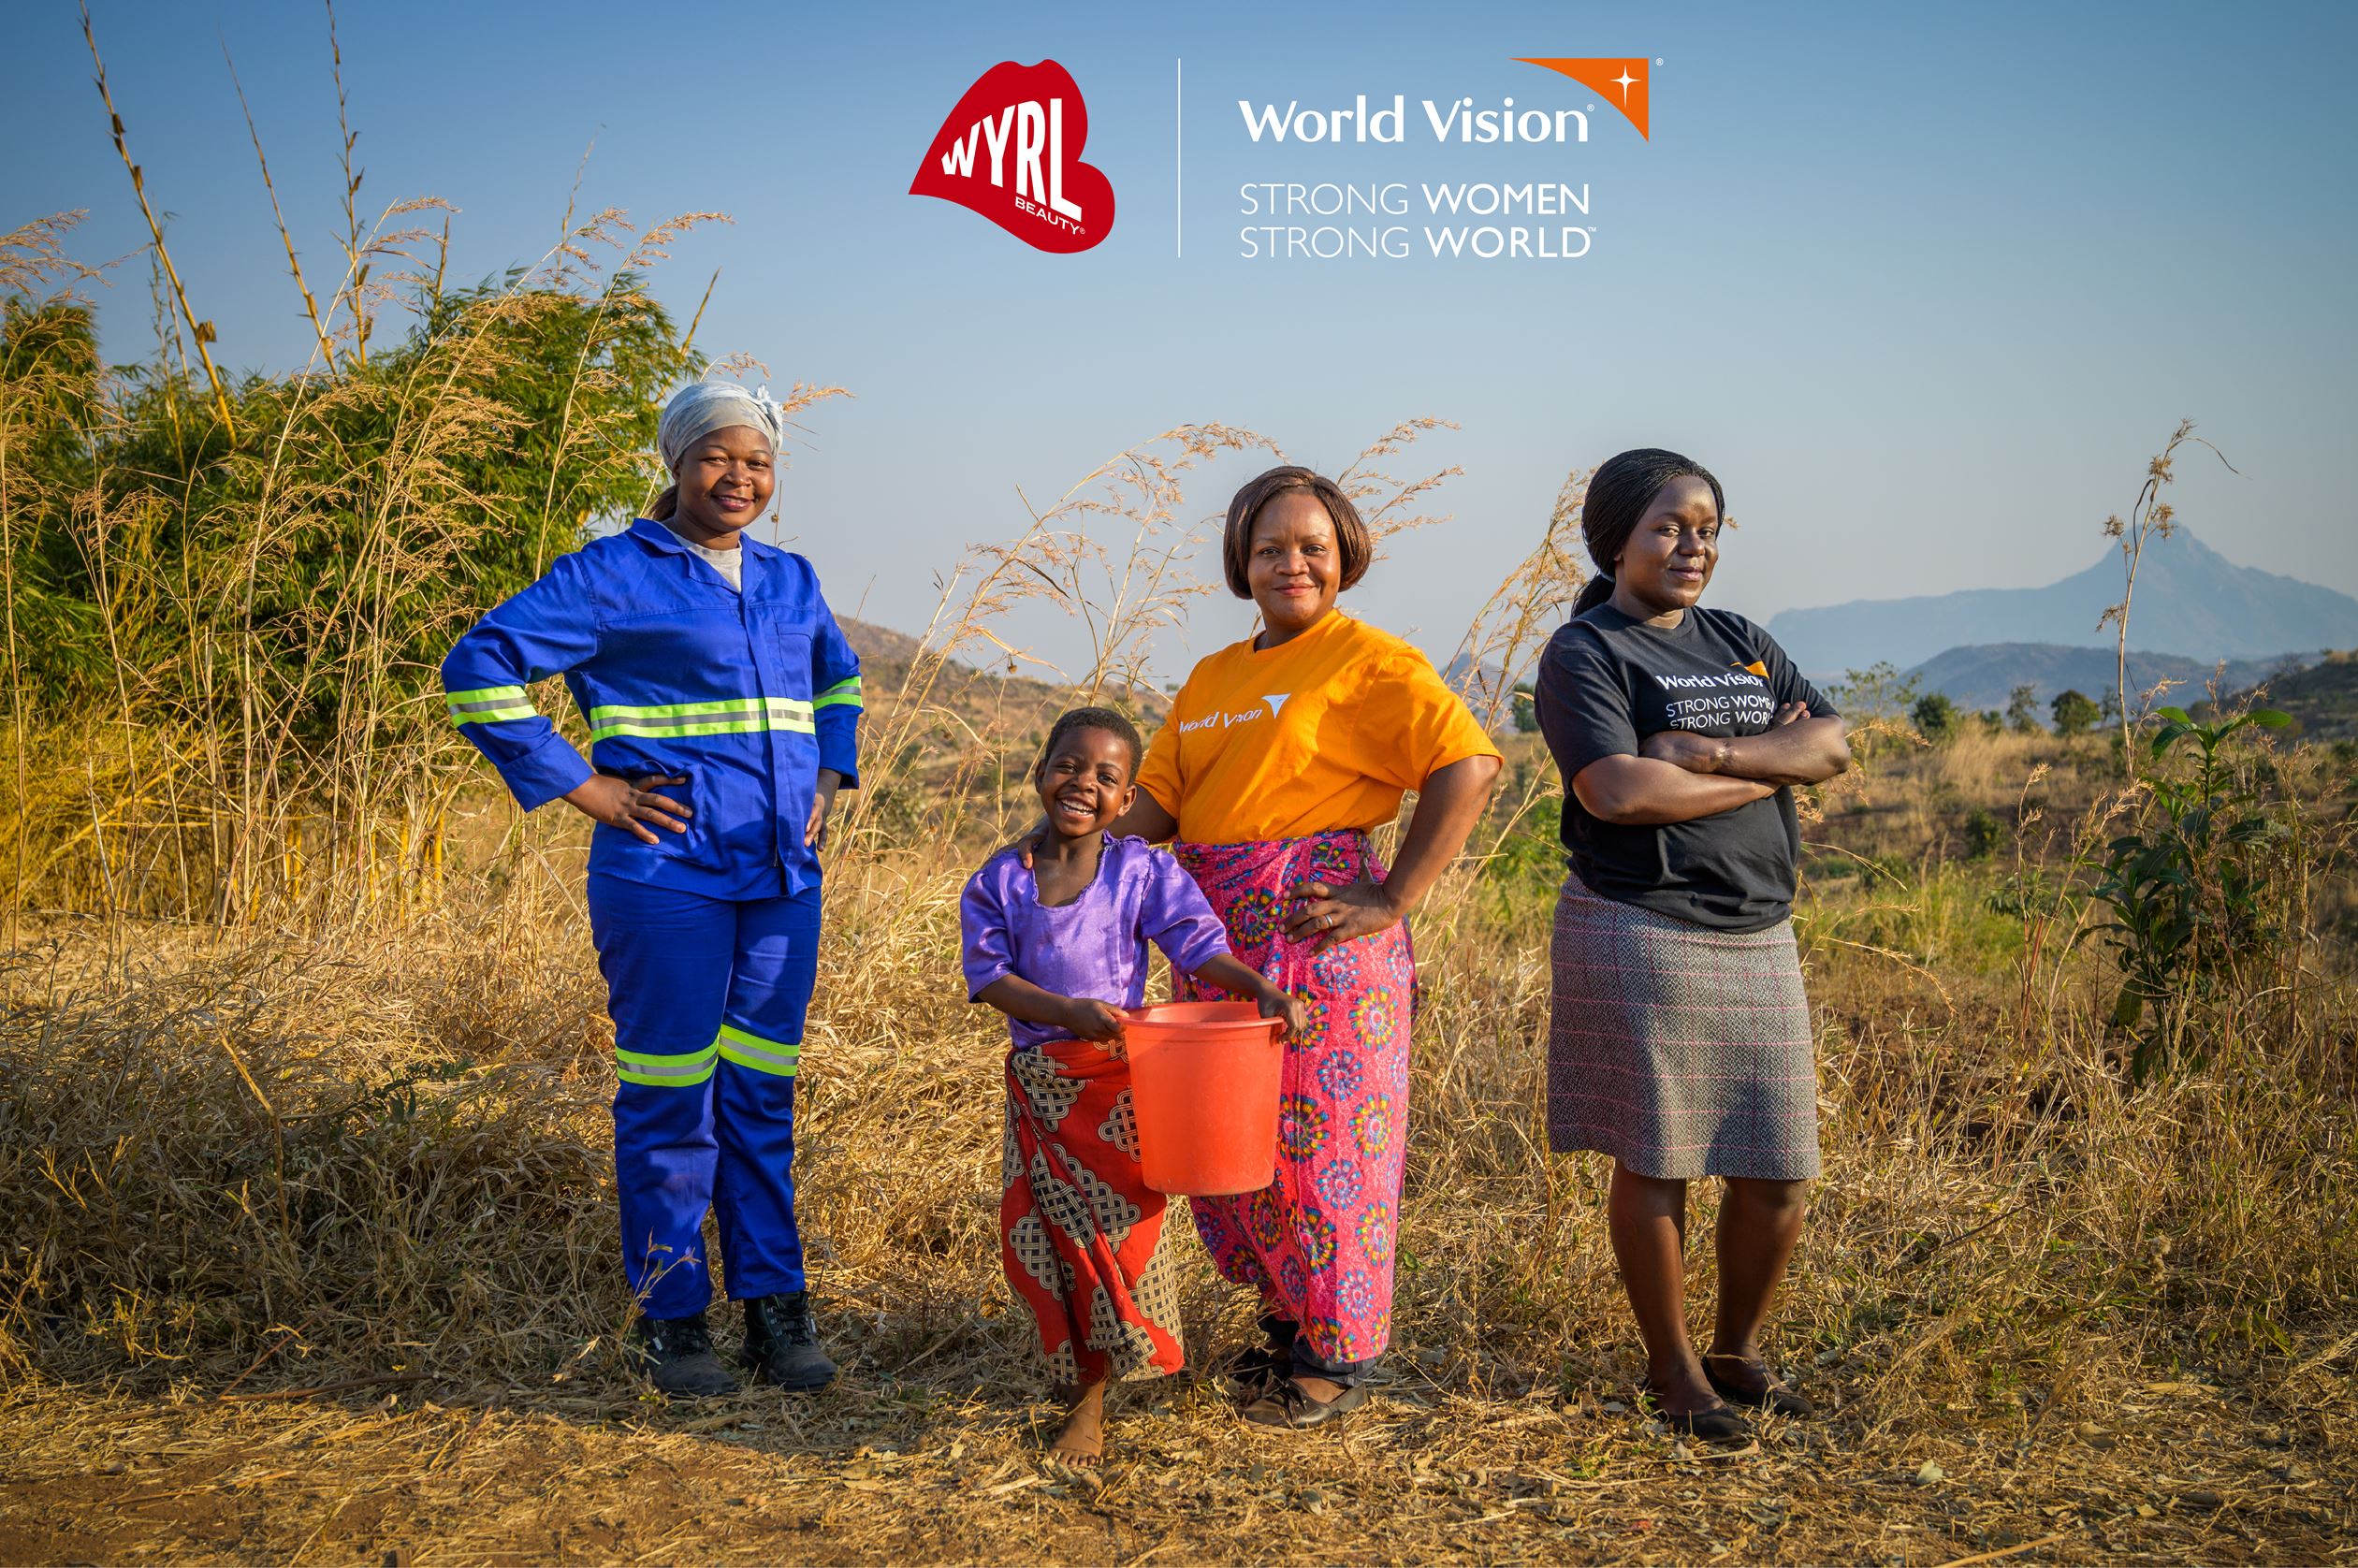 Ireen, 8, is surrounded by women role models: World Vision Malawi staff who want to help make her life better.